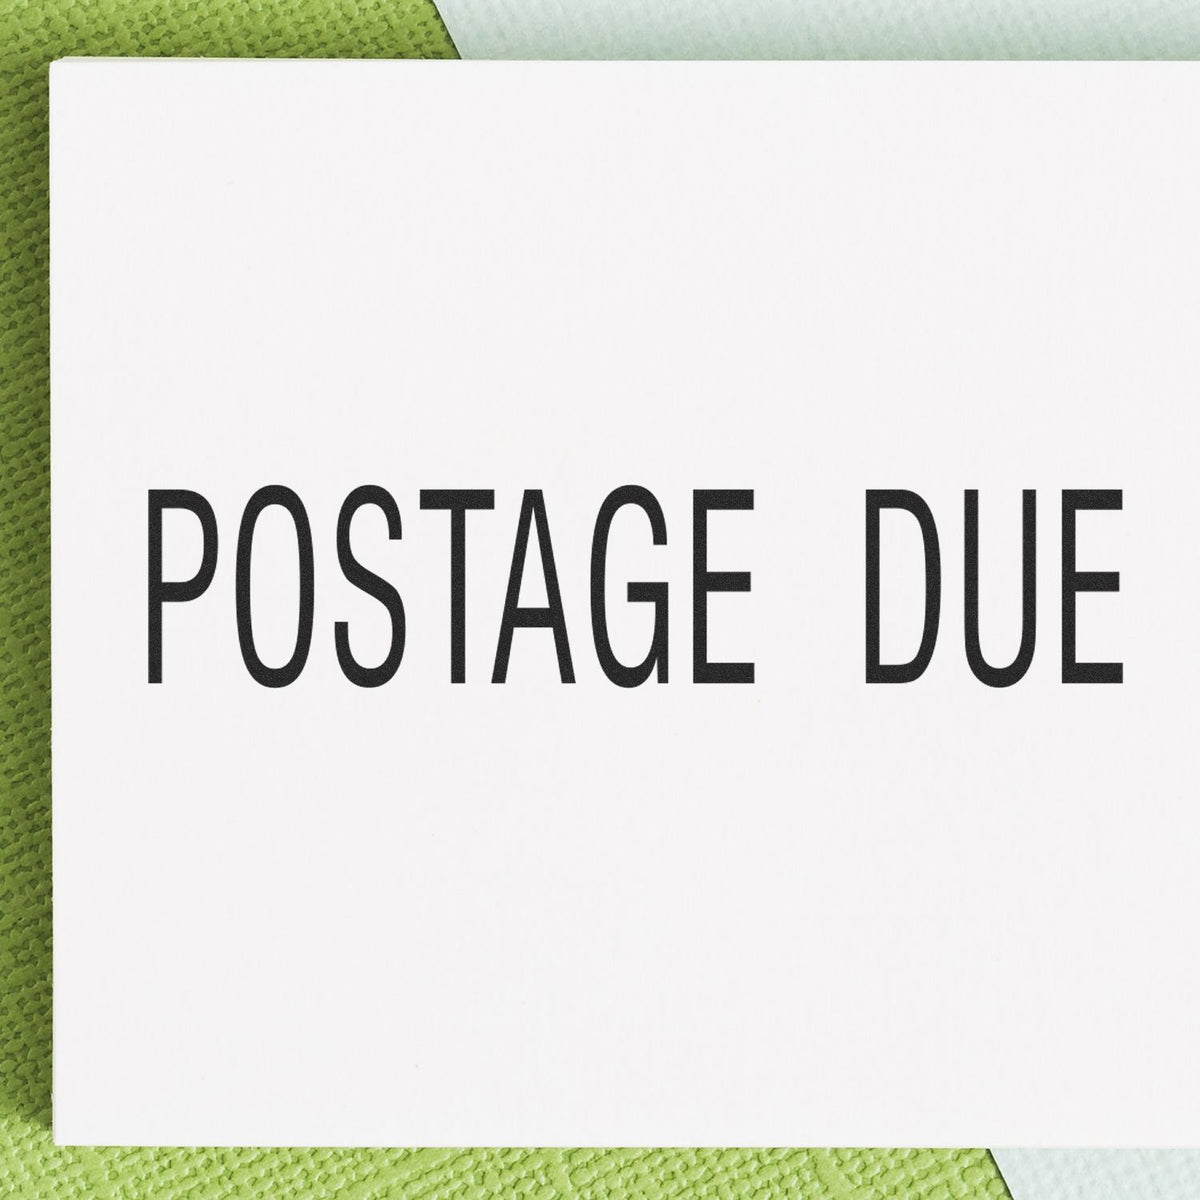 Large Postage Due Rubber Stamp Lifestyle Photo